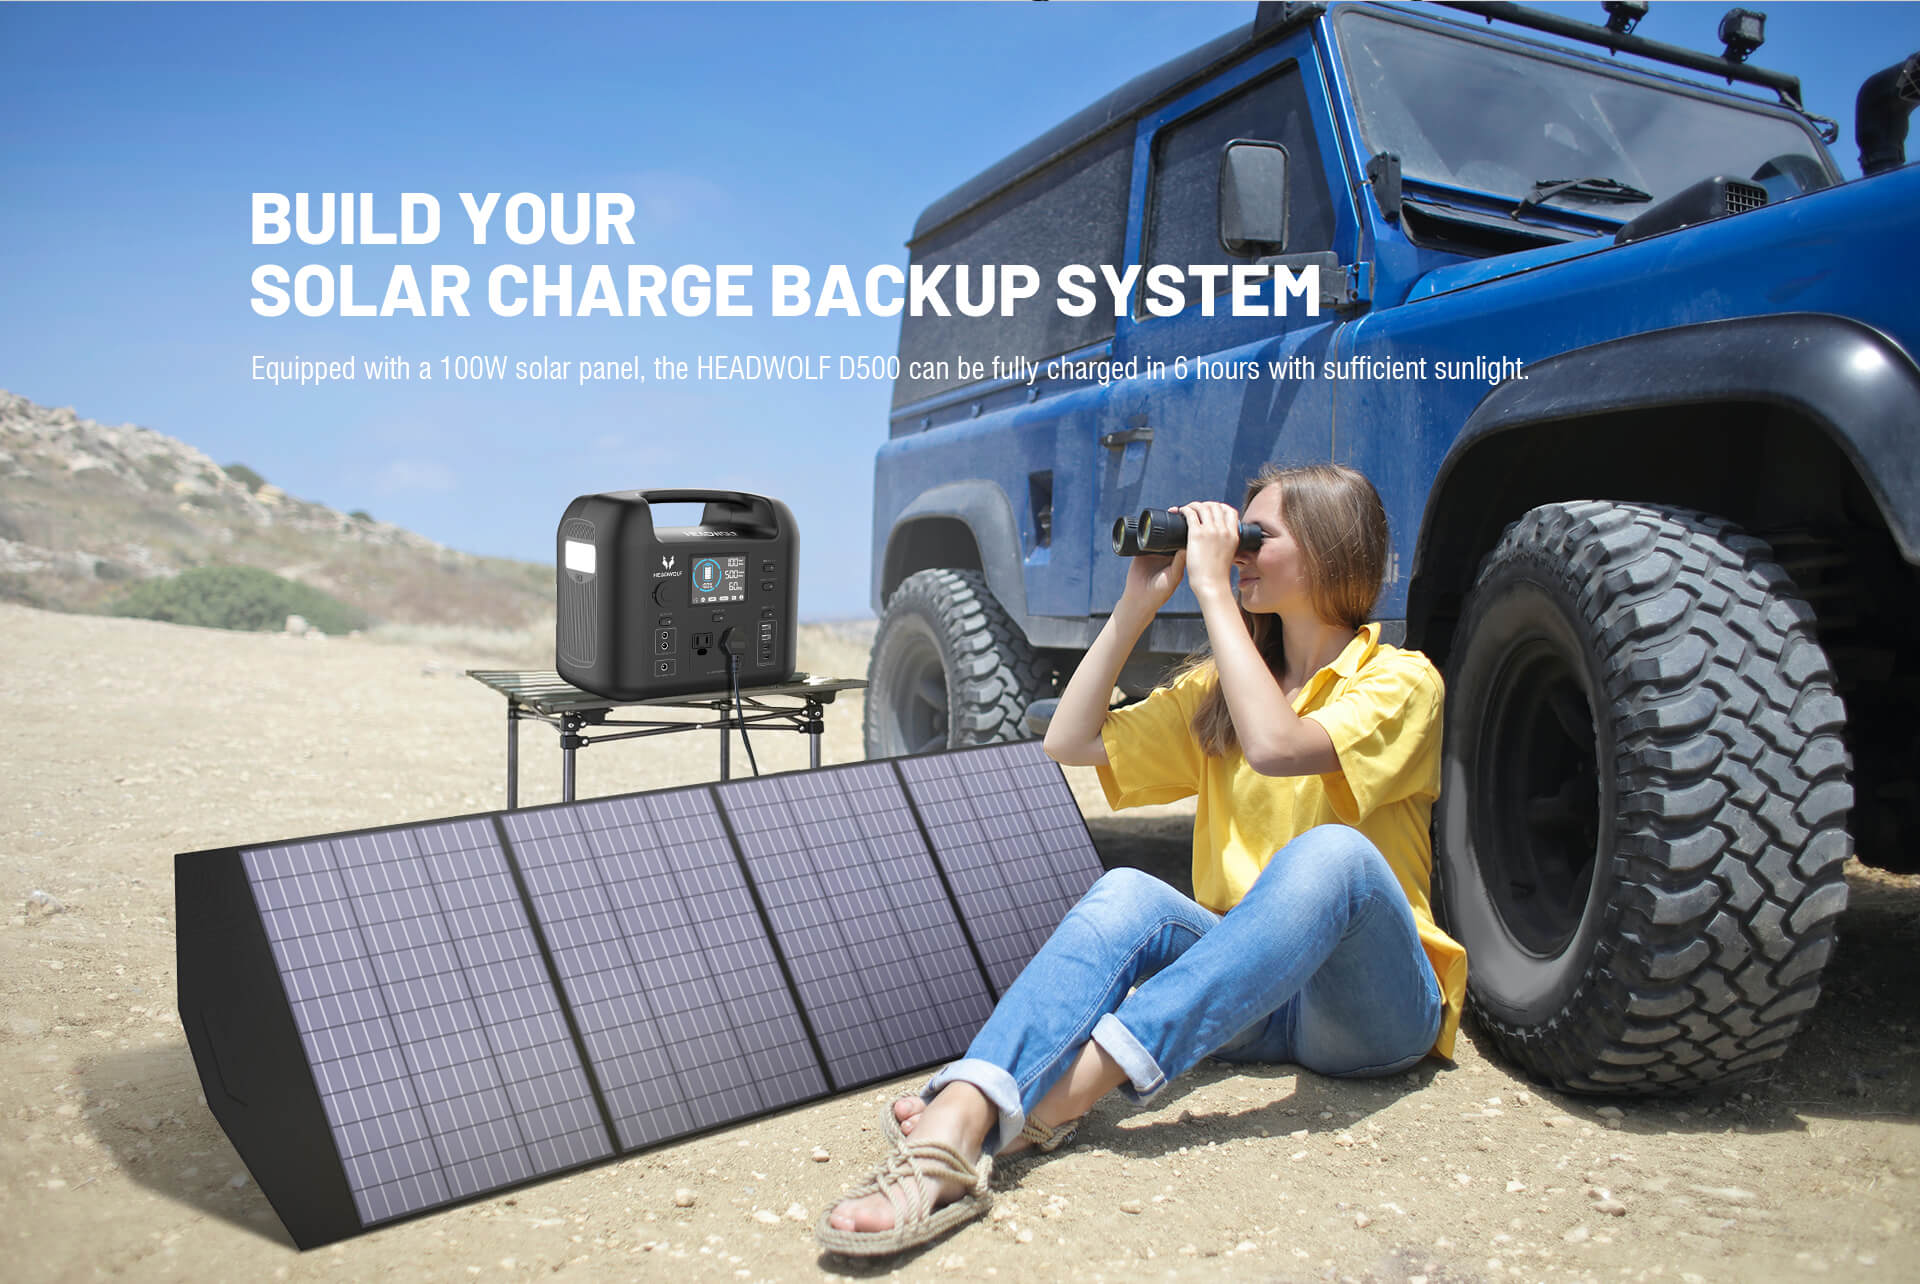 Build Your Solar Charge Backup System